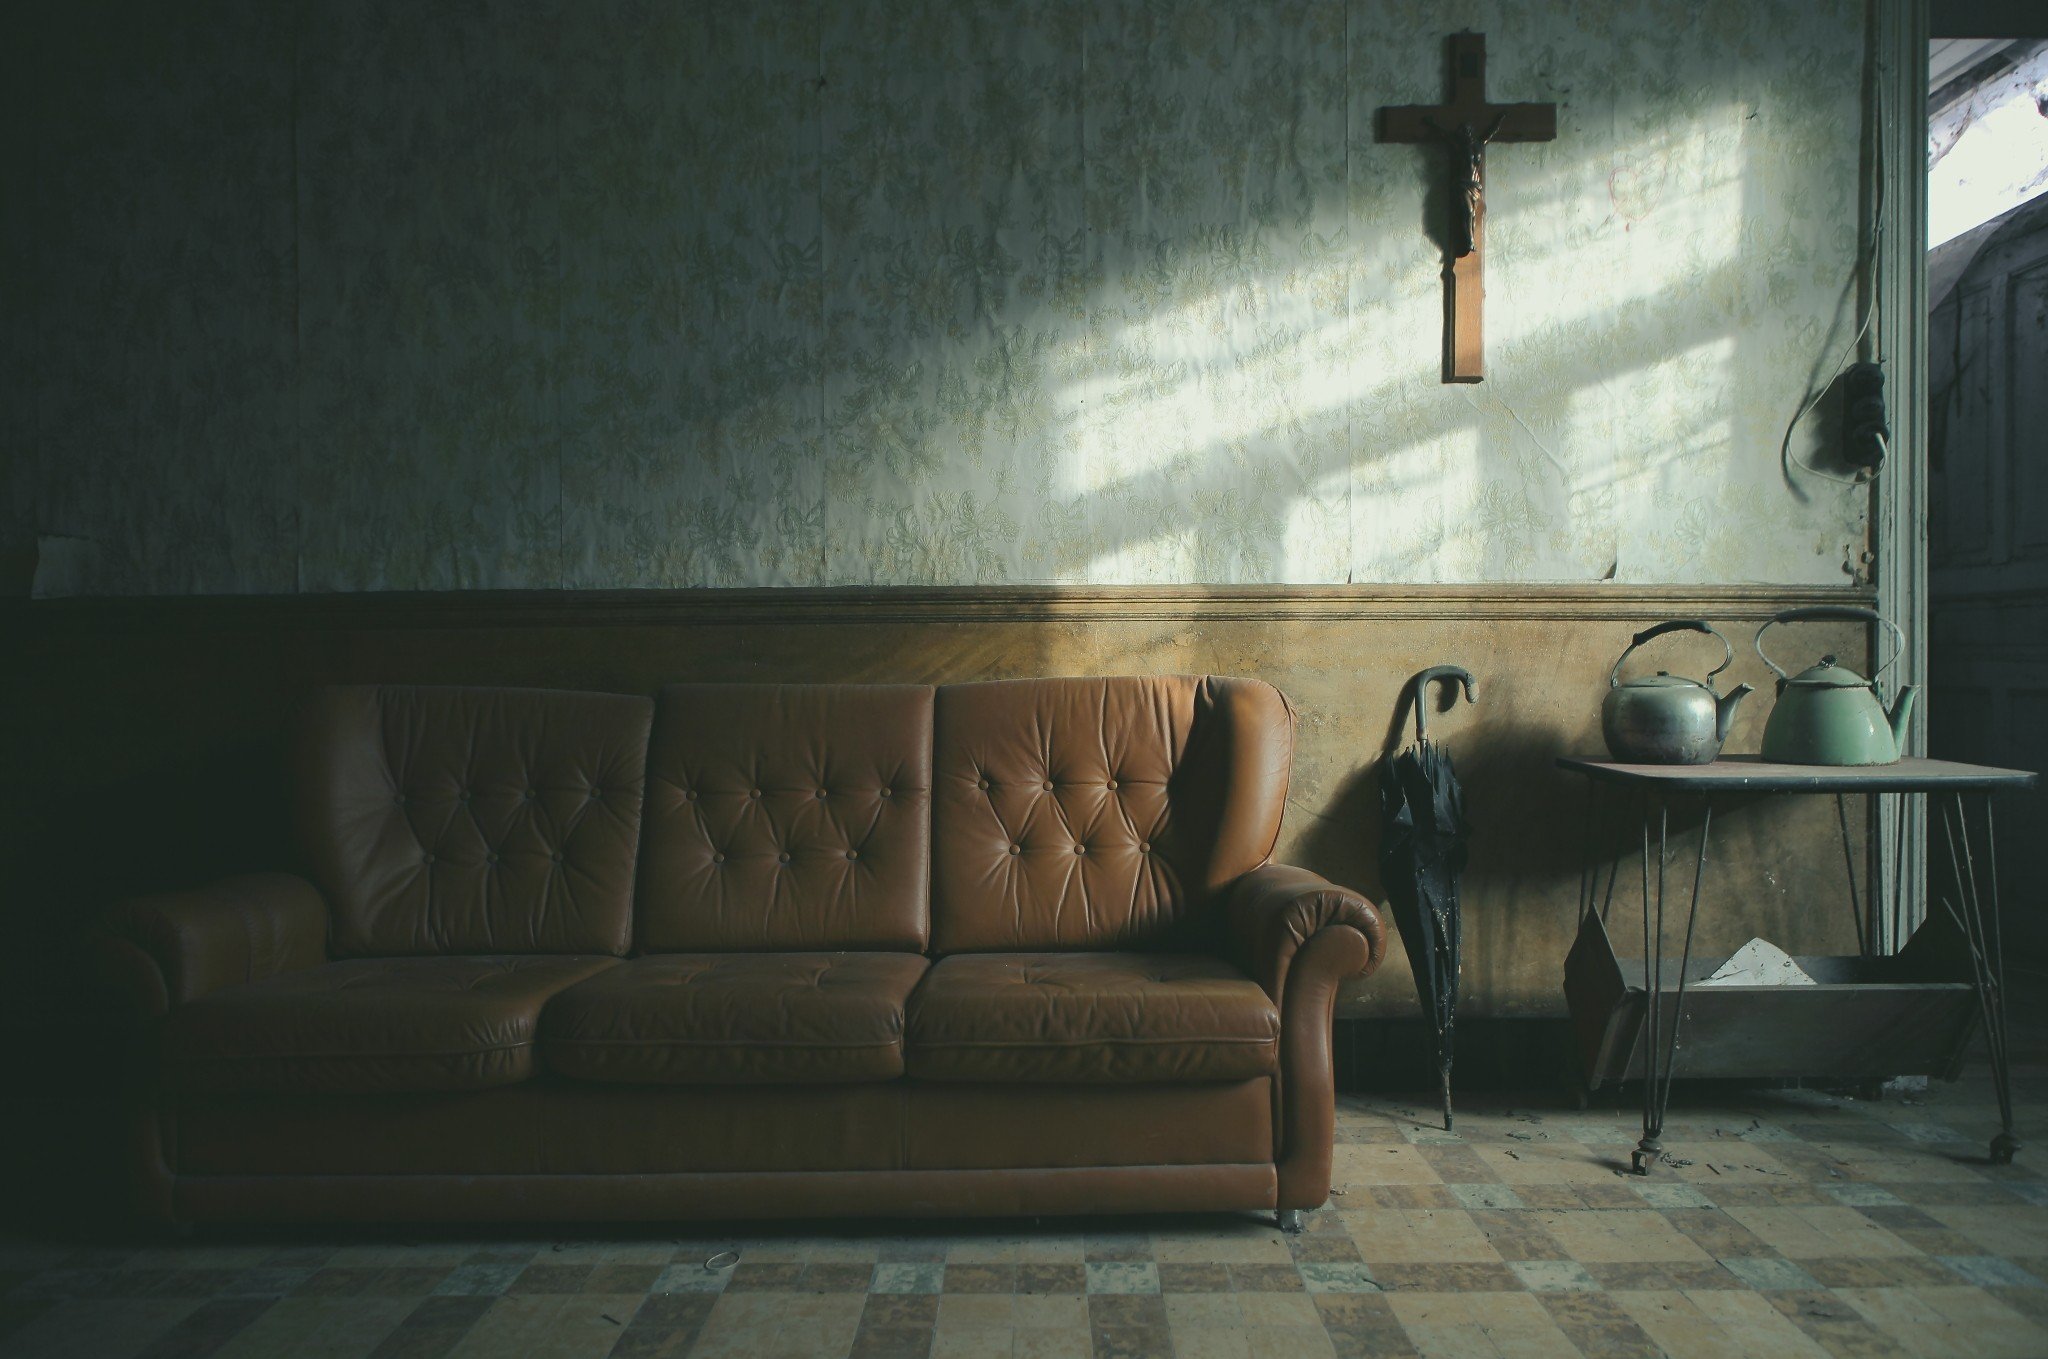 interior, Photography, Abandoned, Couch, Cross, Jesus Christ, Wall, Umbrella, Kettle, Sunlight, Shadow Wallpaper